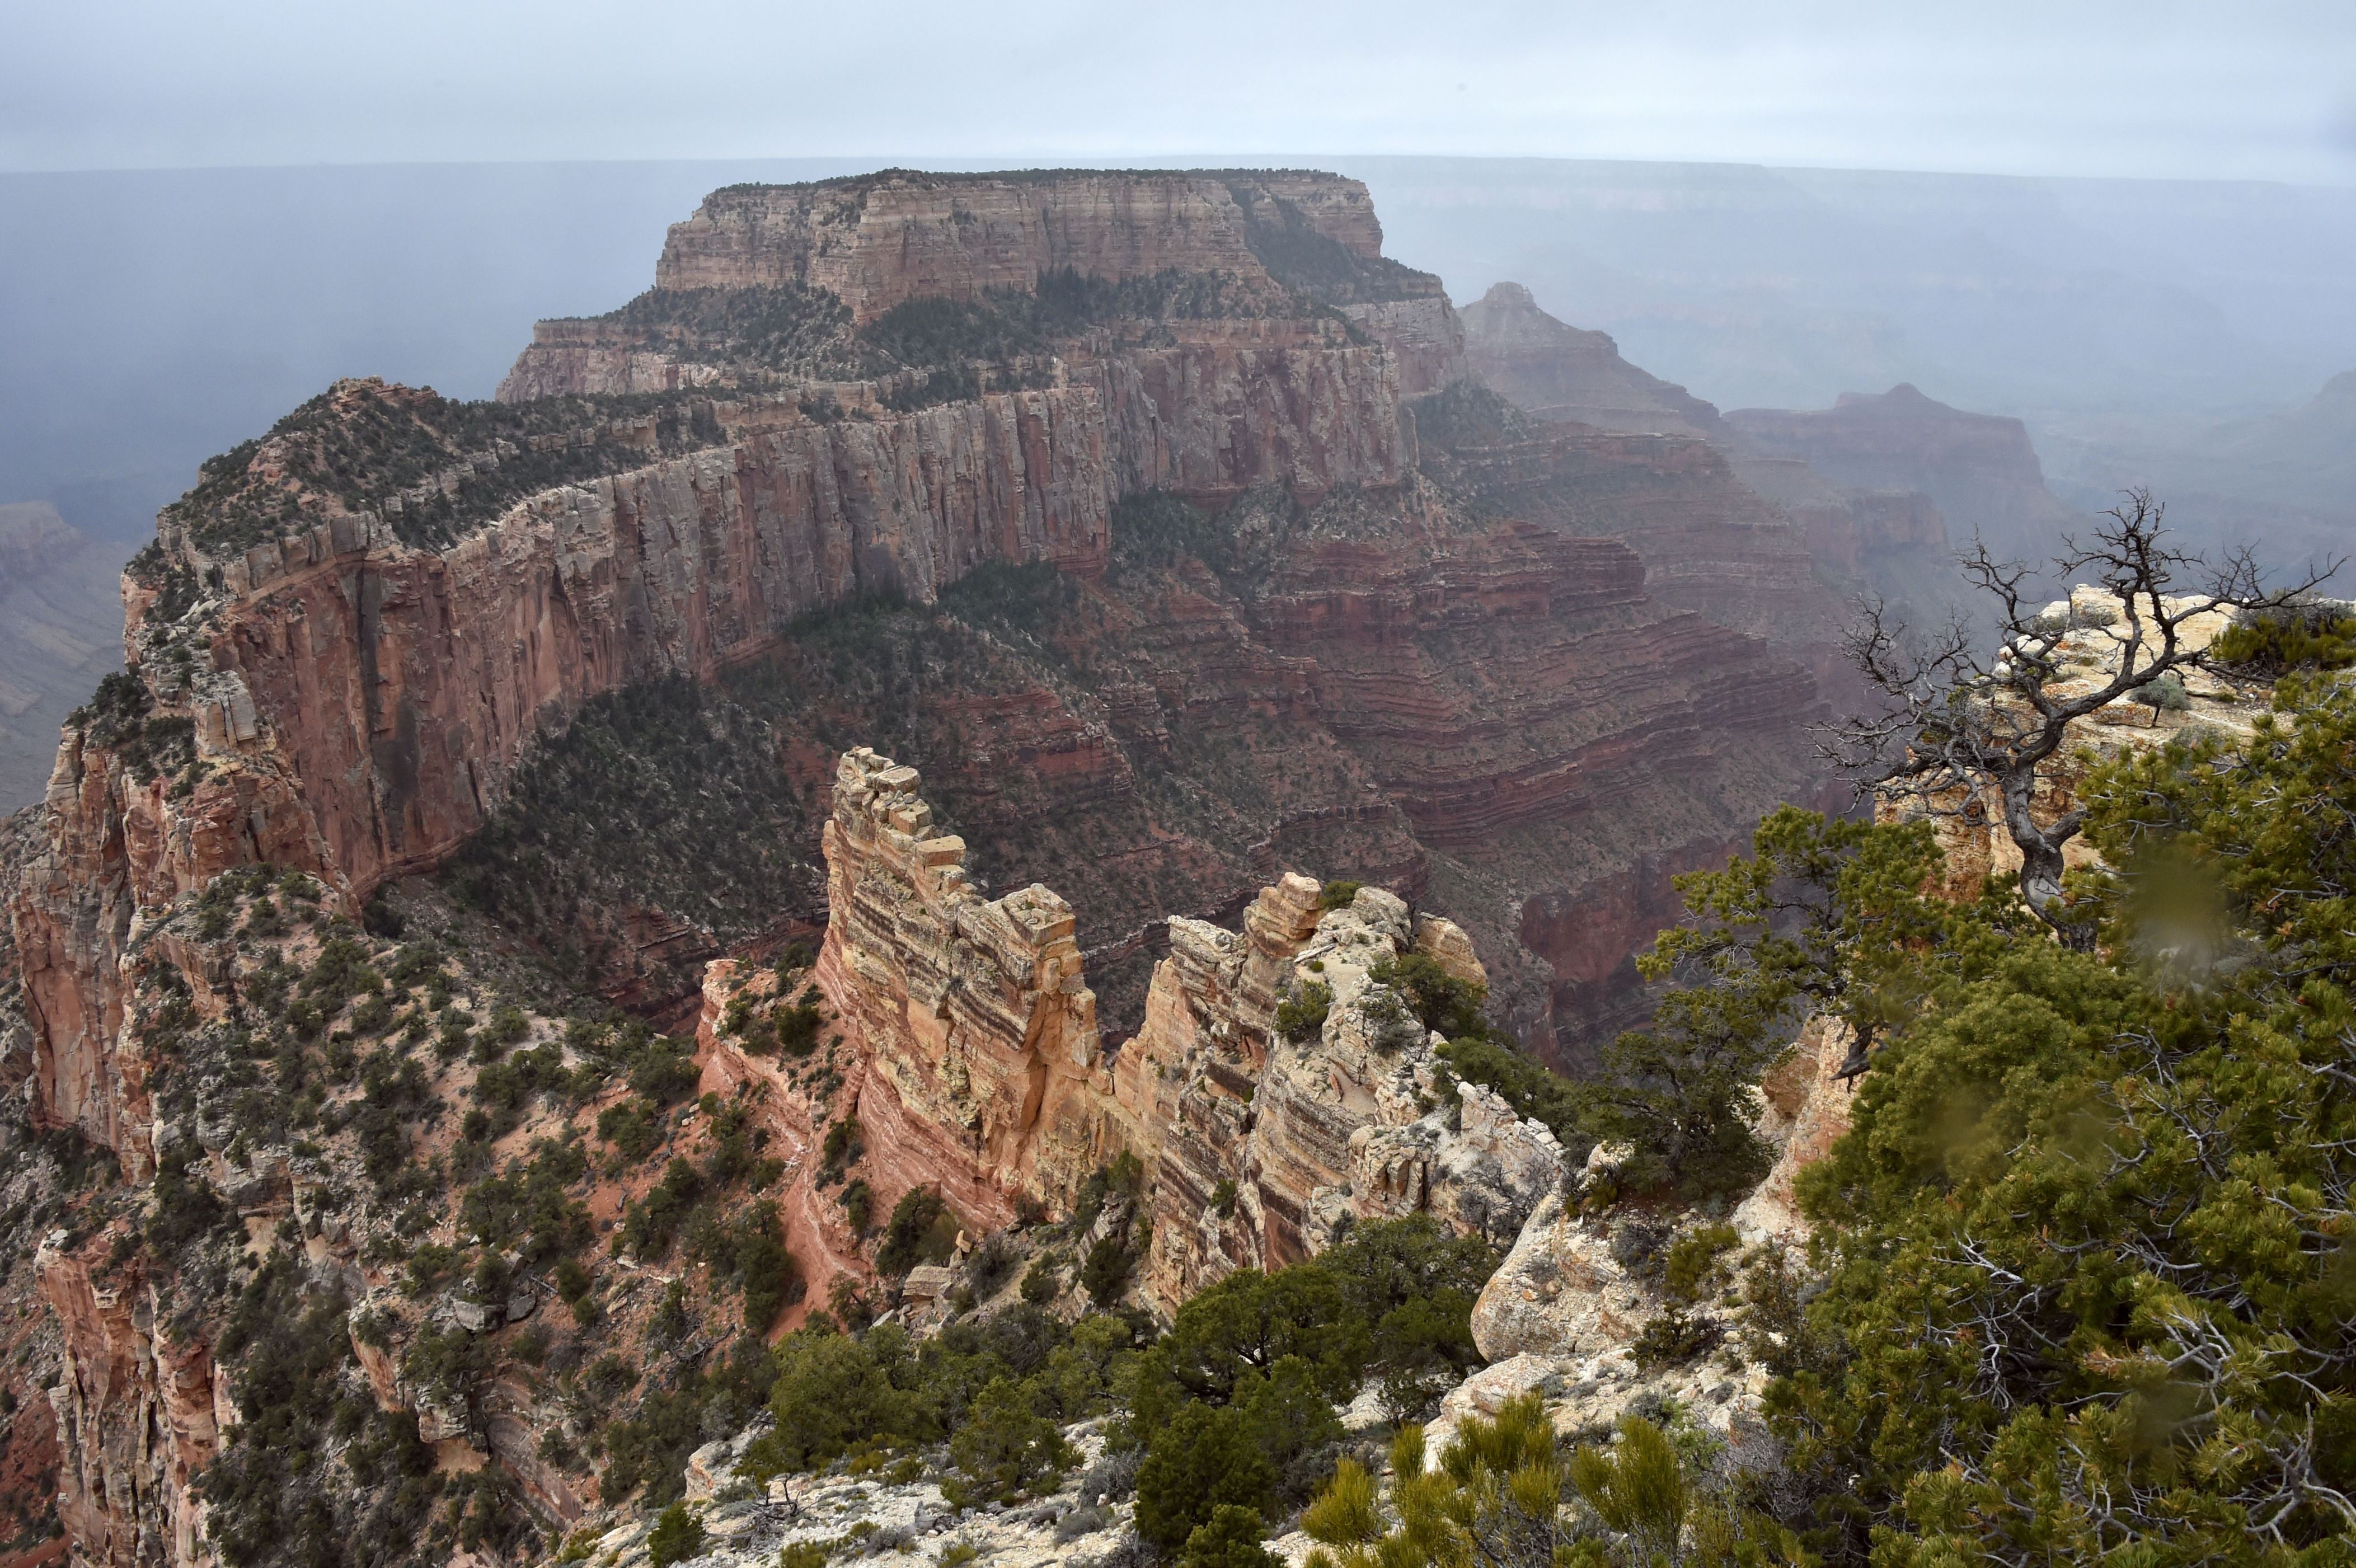 A view from the North Rim of the Grand Canyon on May, 18, 2015. AFP PHOTO/MLADEN ANTONOV        (Photo credit should read MLADEN ANTONOV/AFP/Getty Images)